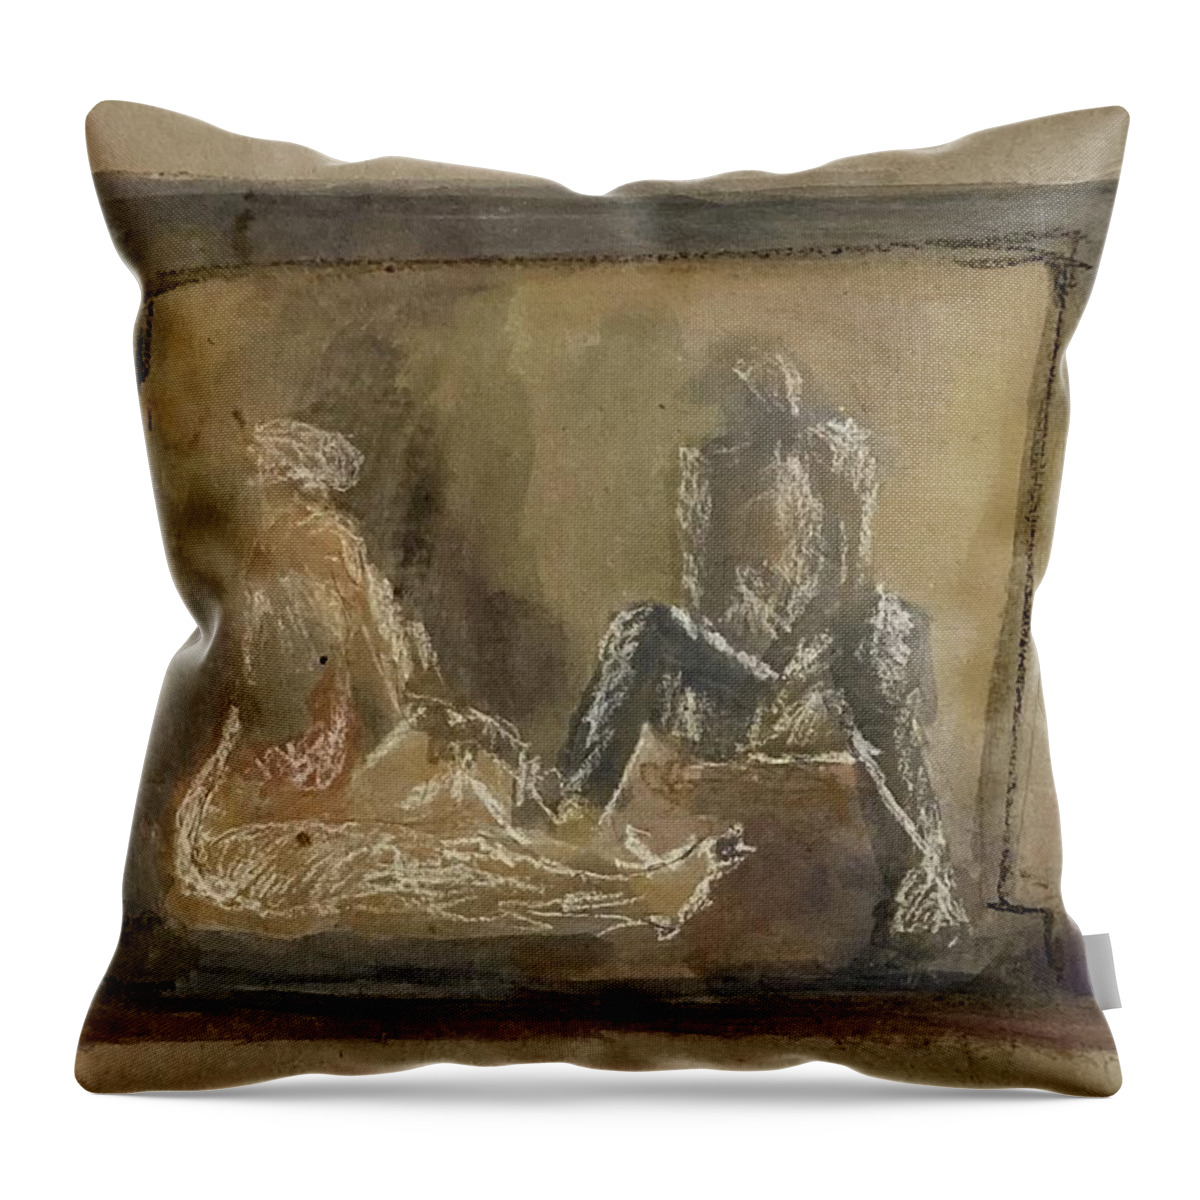 Two Figures Throw Pillow featuring the painting Together by David Euler